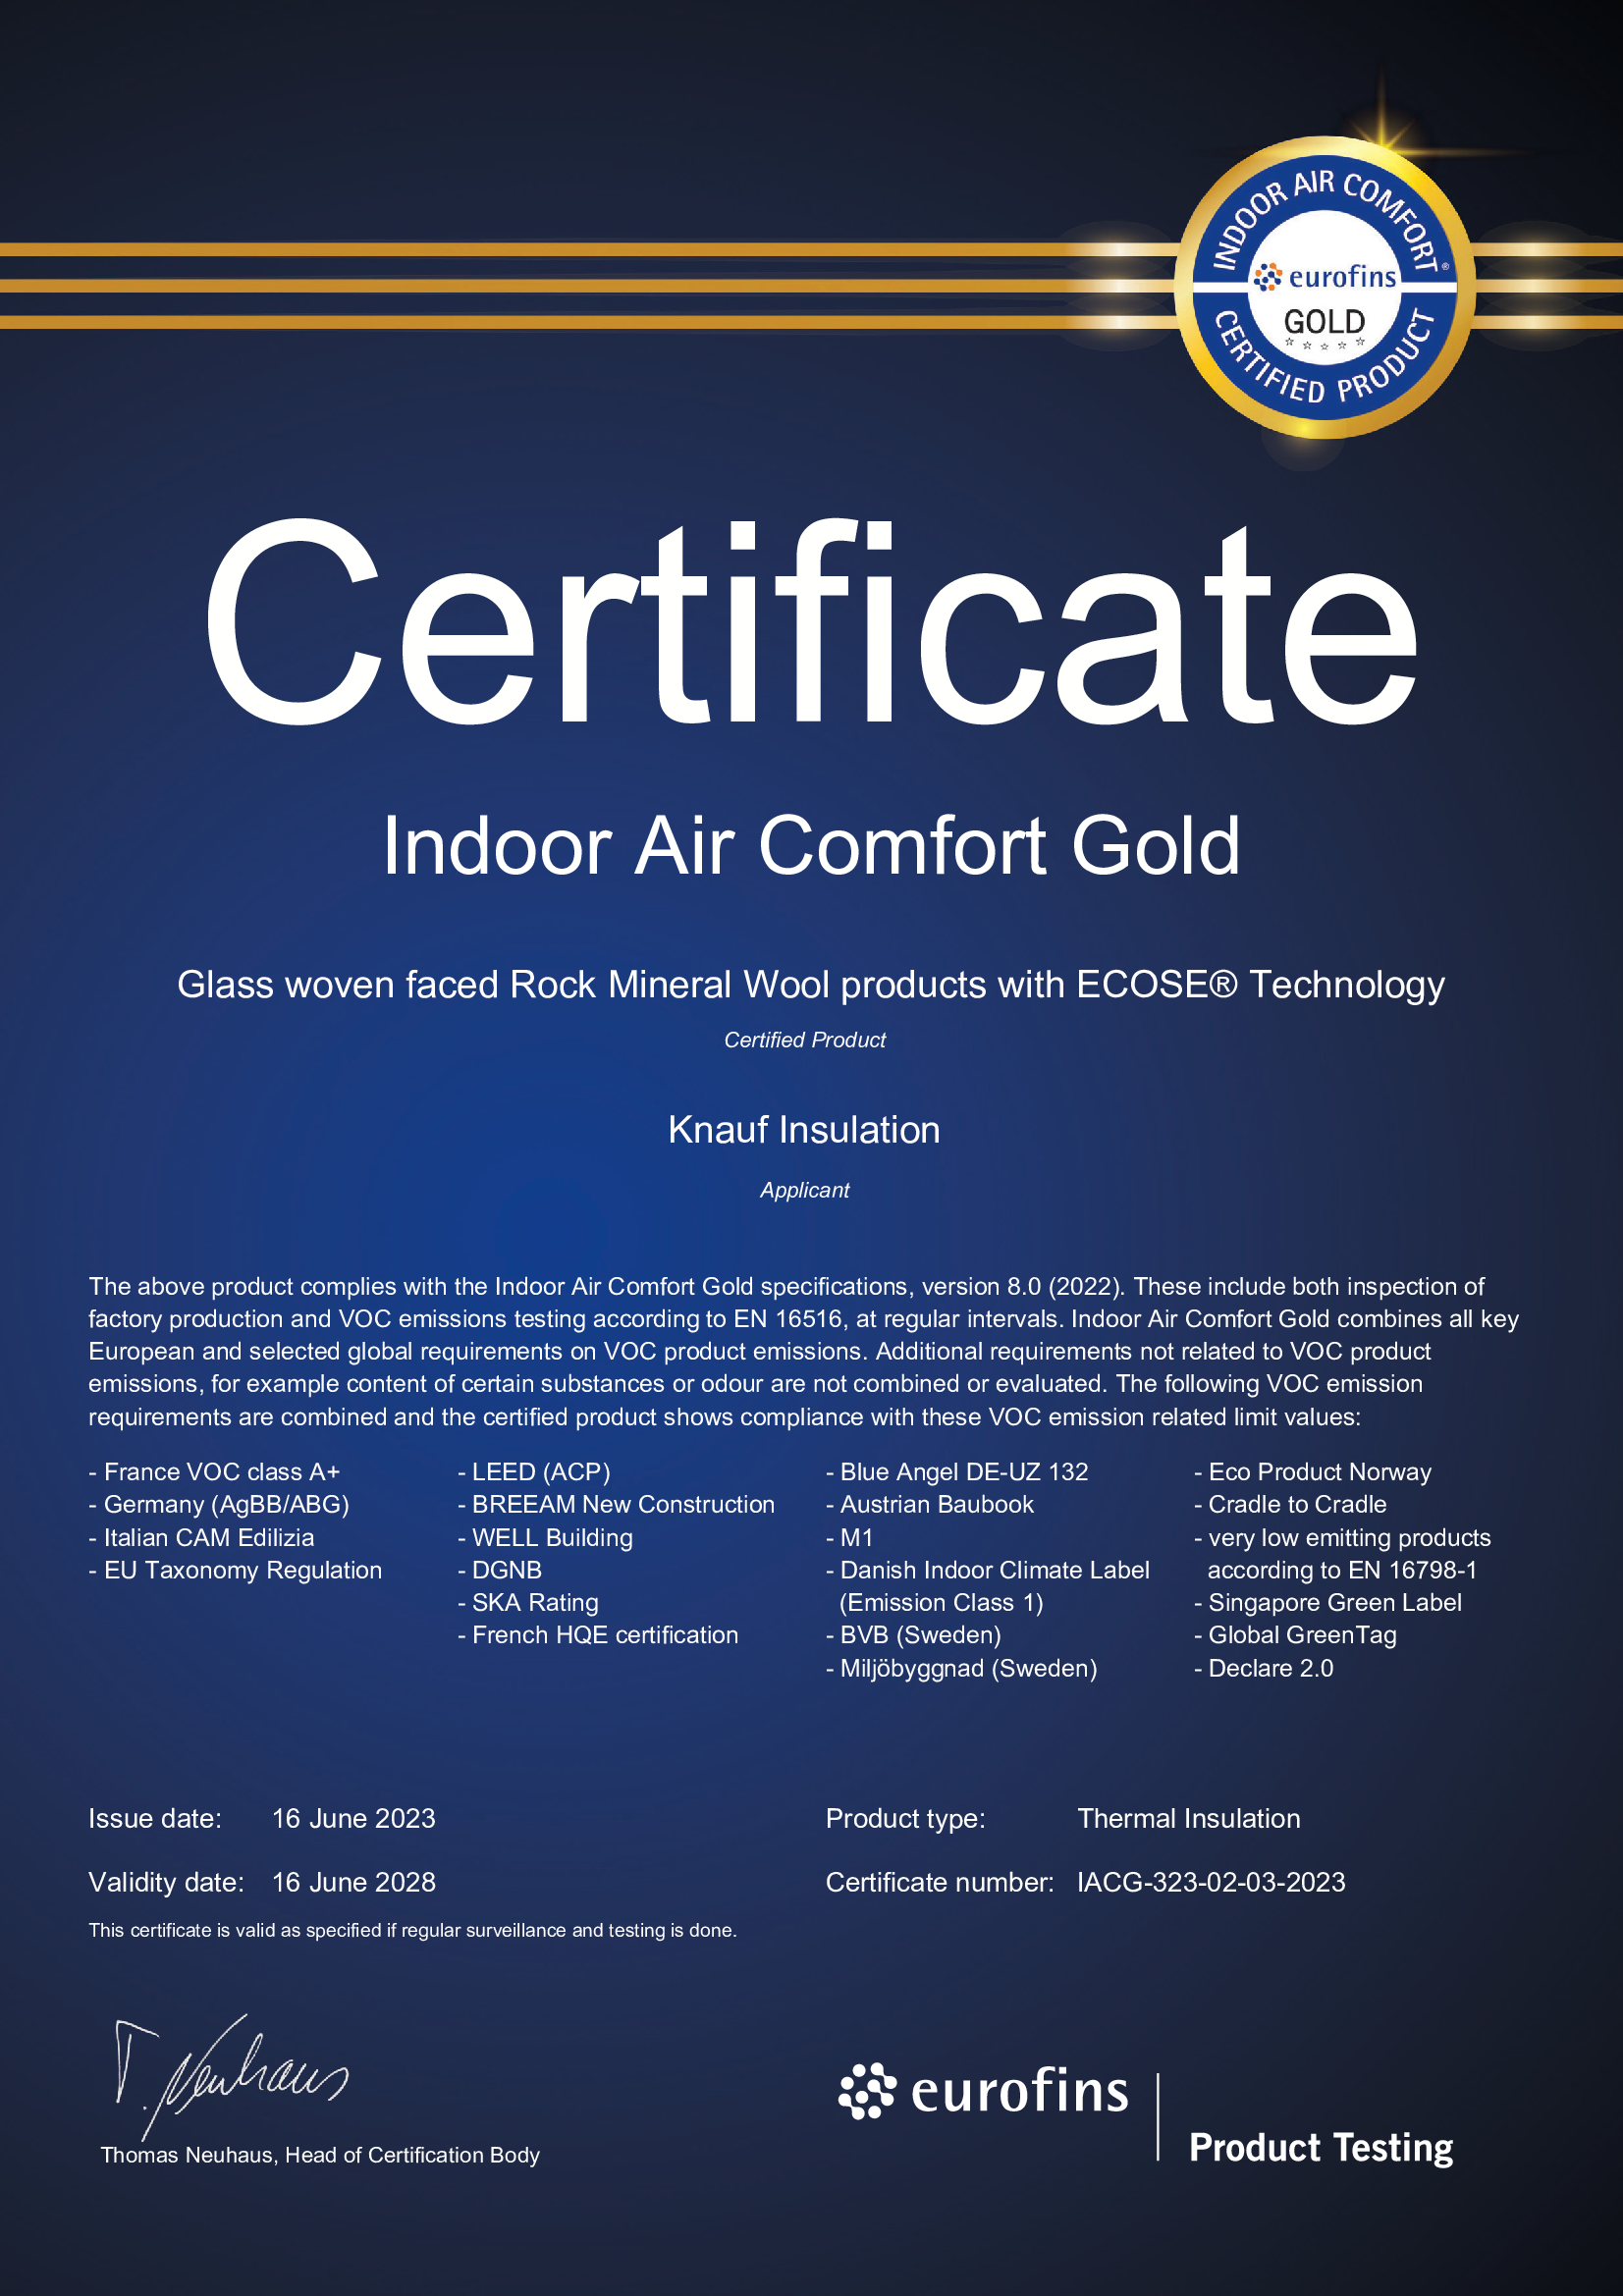 Indoor Air Quality (IAO) eurofins GOLD Novi Marof  (glas woven  RMW faced products)